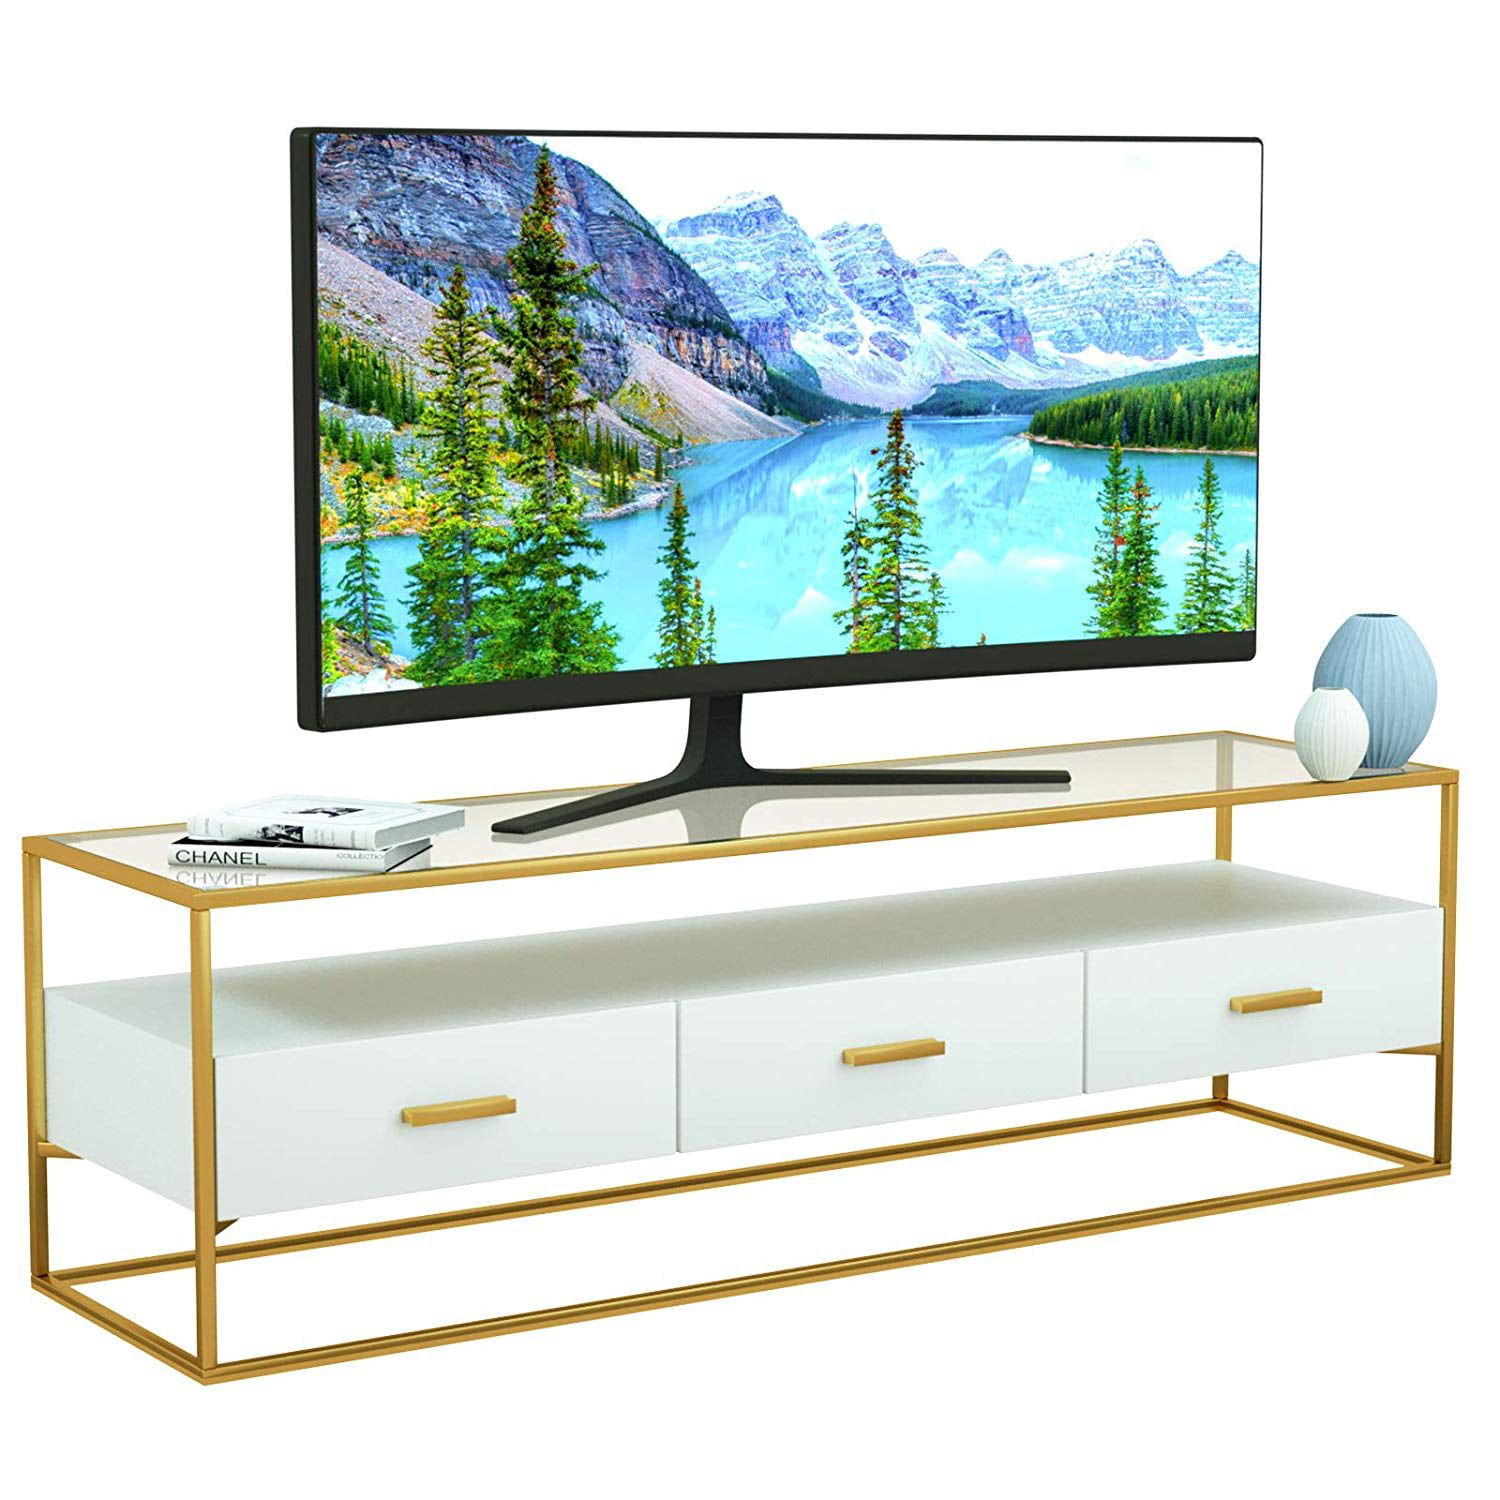 Mecor White Tv Stand,entertainment Center High Gloss 59 Inch Width,3 Regarding White Tv Stands Entertainment Center (Gallery 6 of 20)